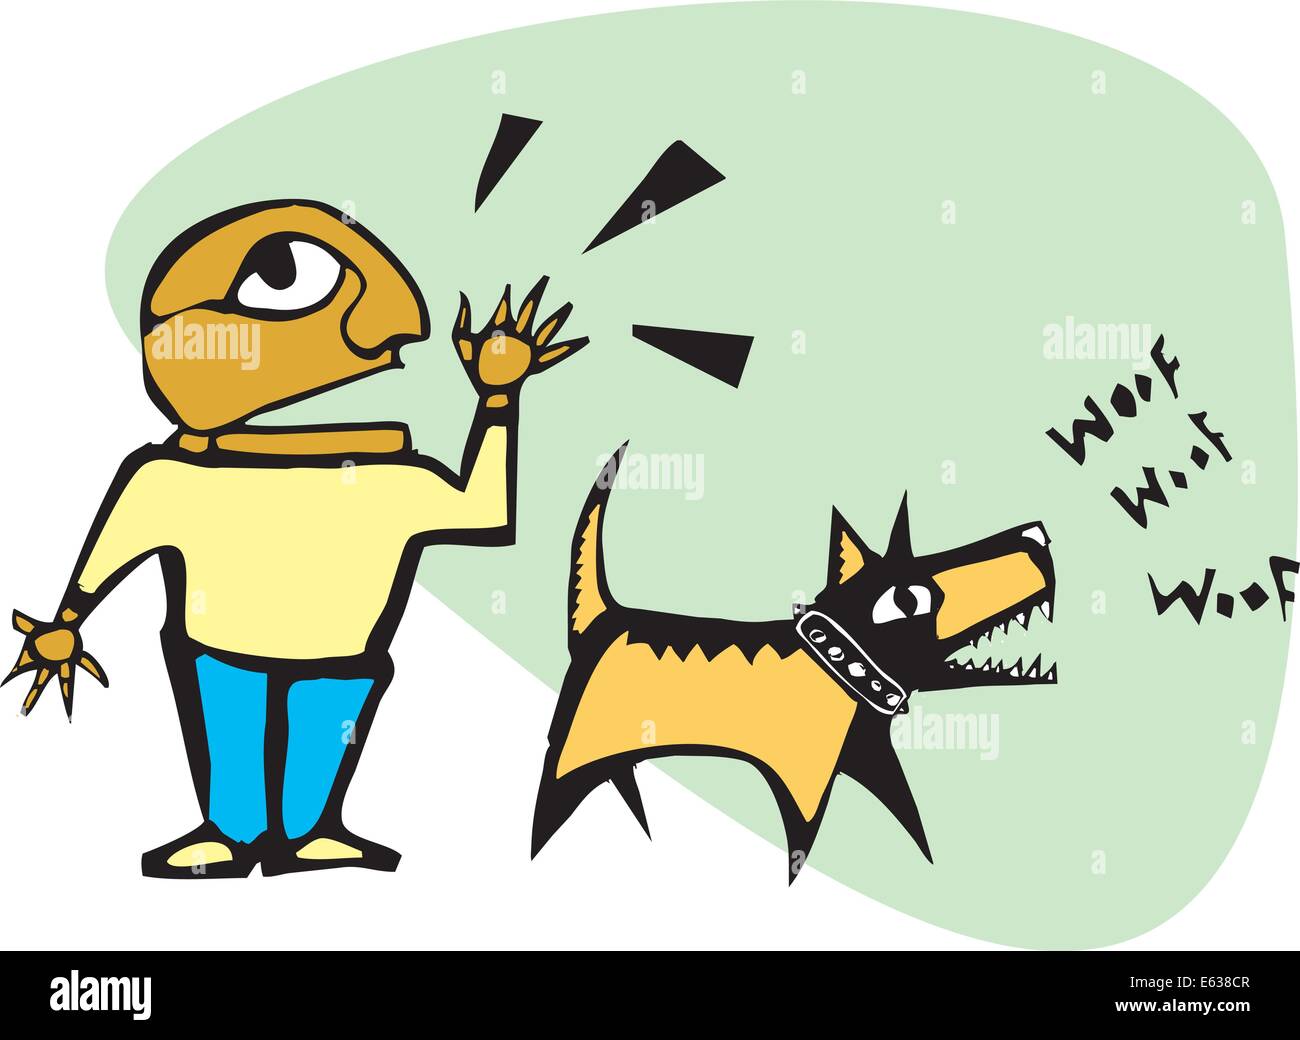 Man yelling while his dog is barking. Stock Vector